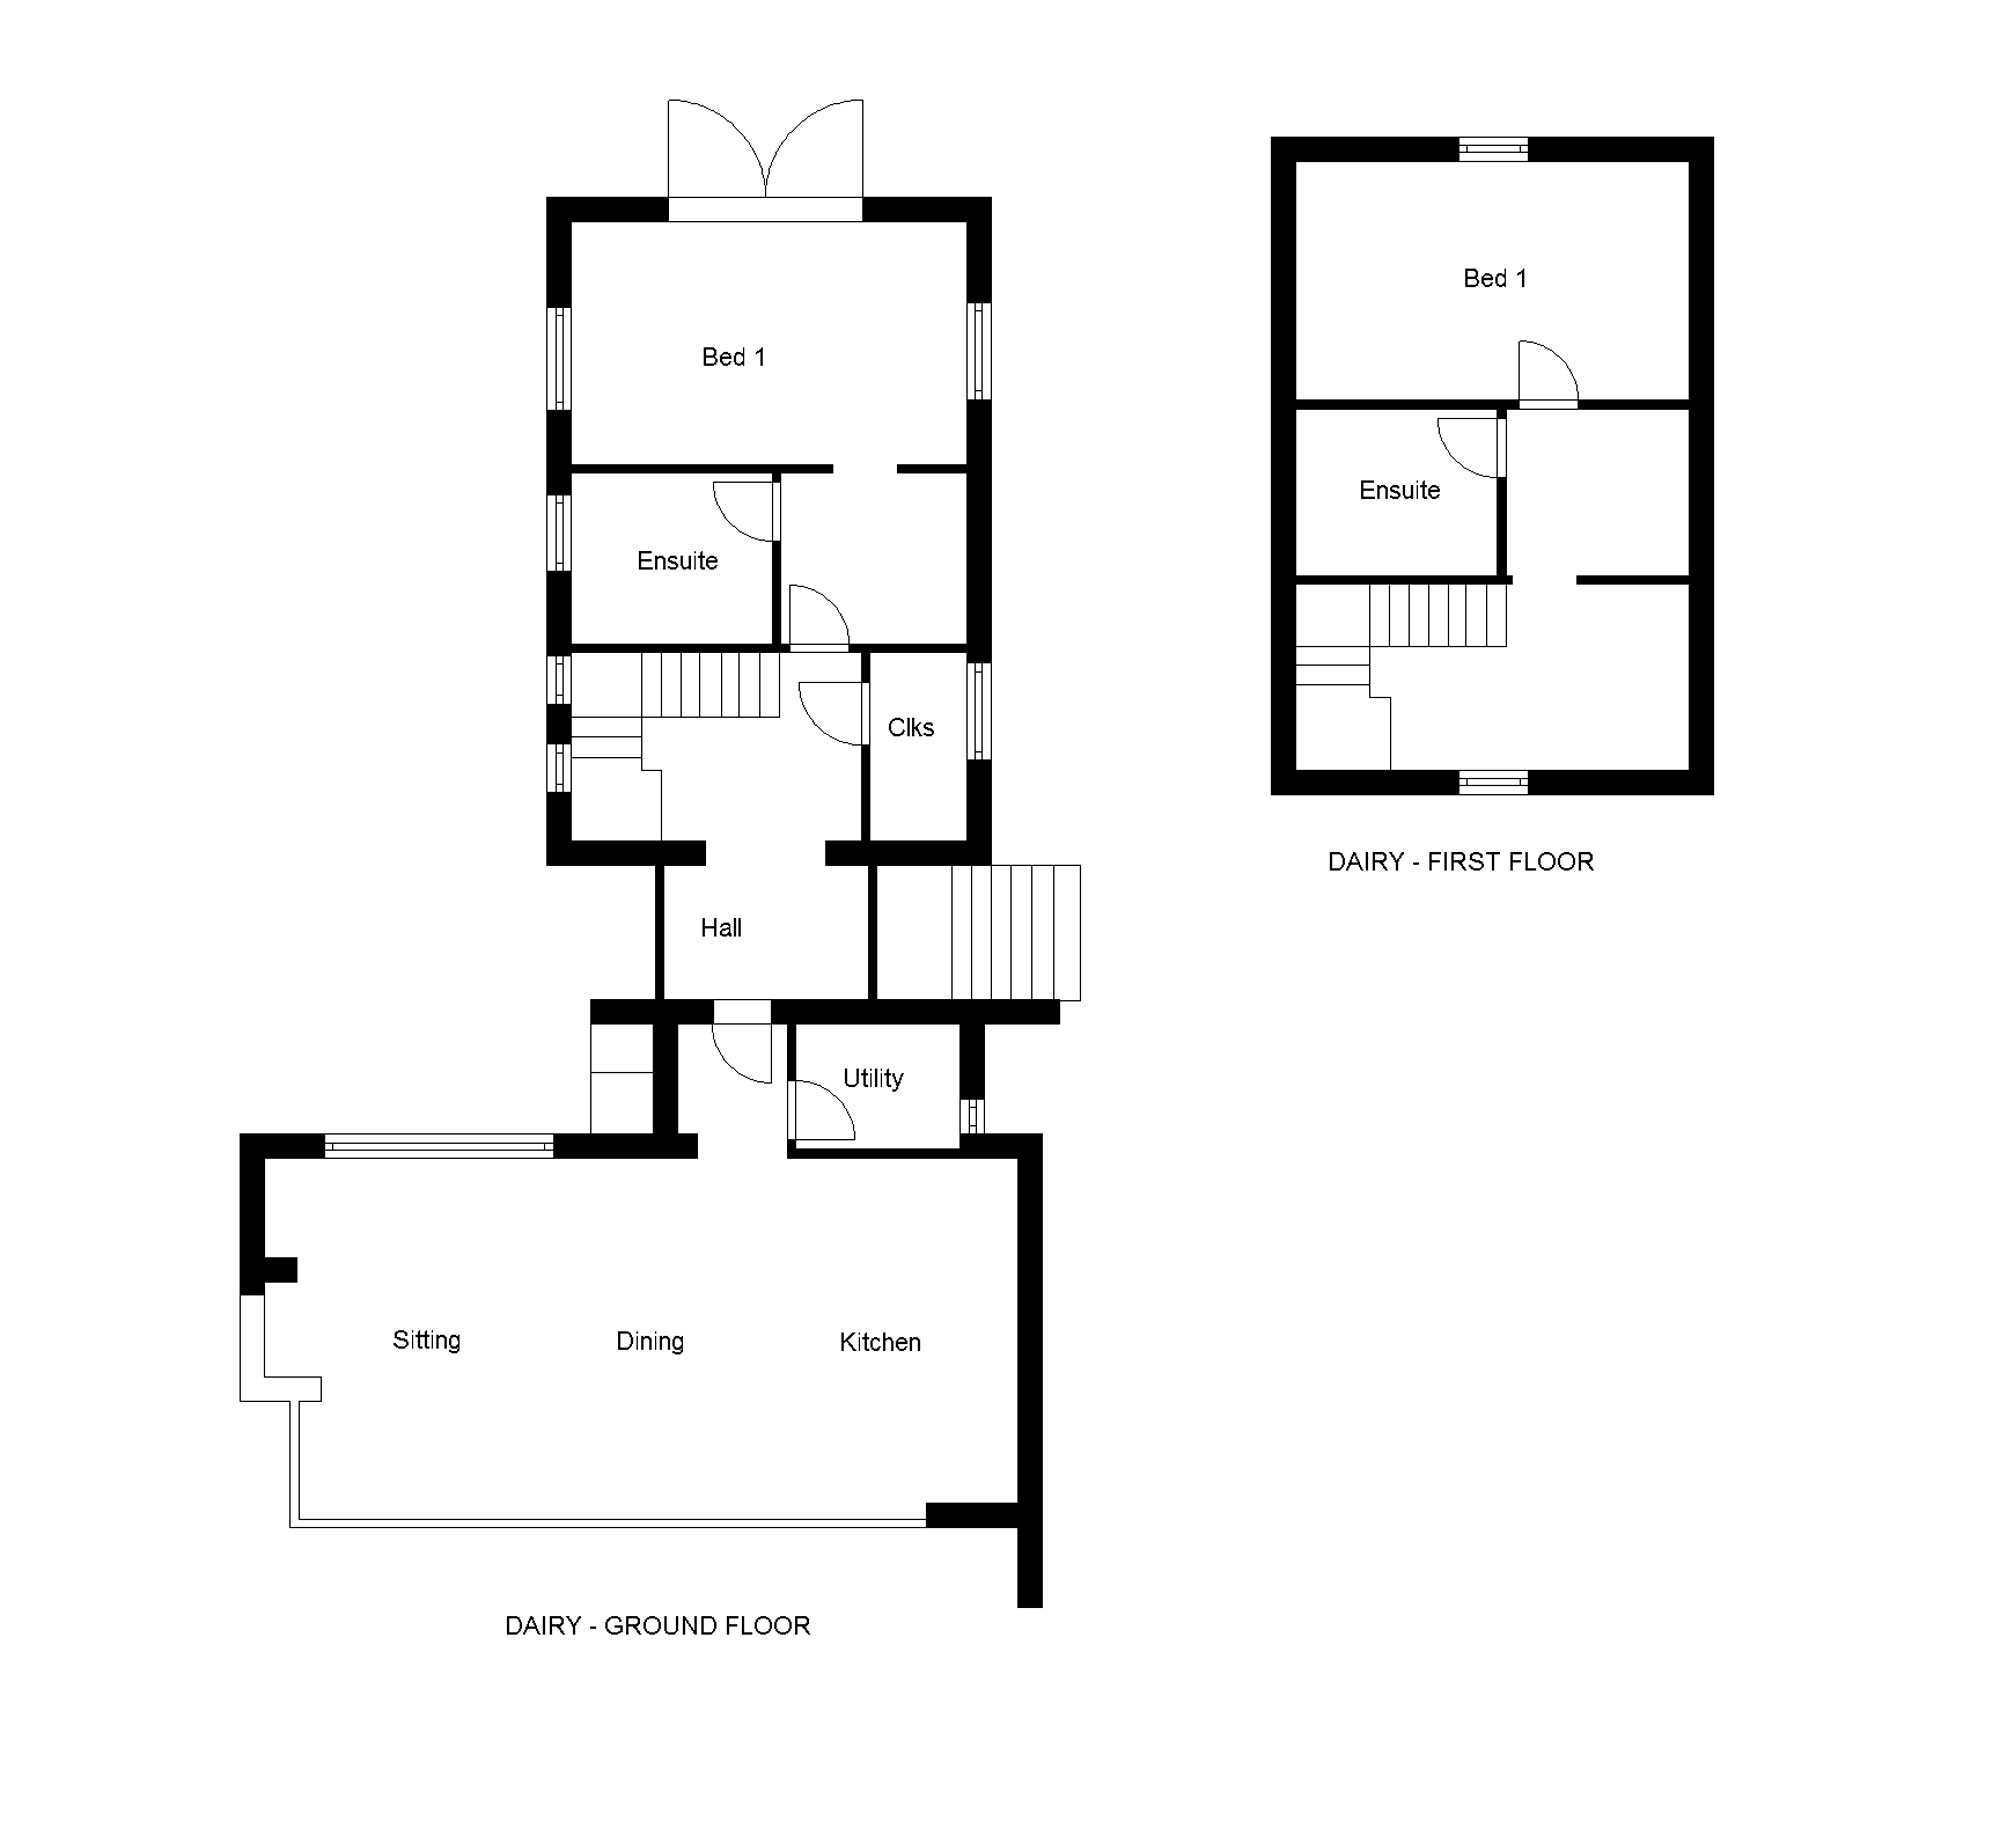 First storey floor plan for conversion